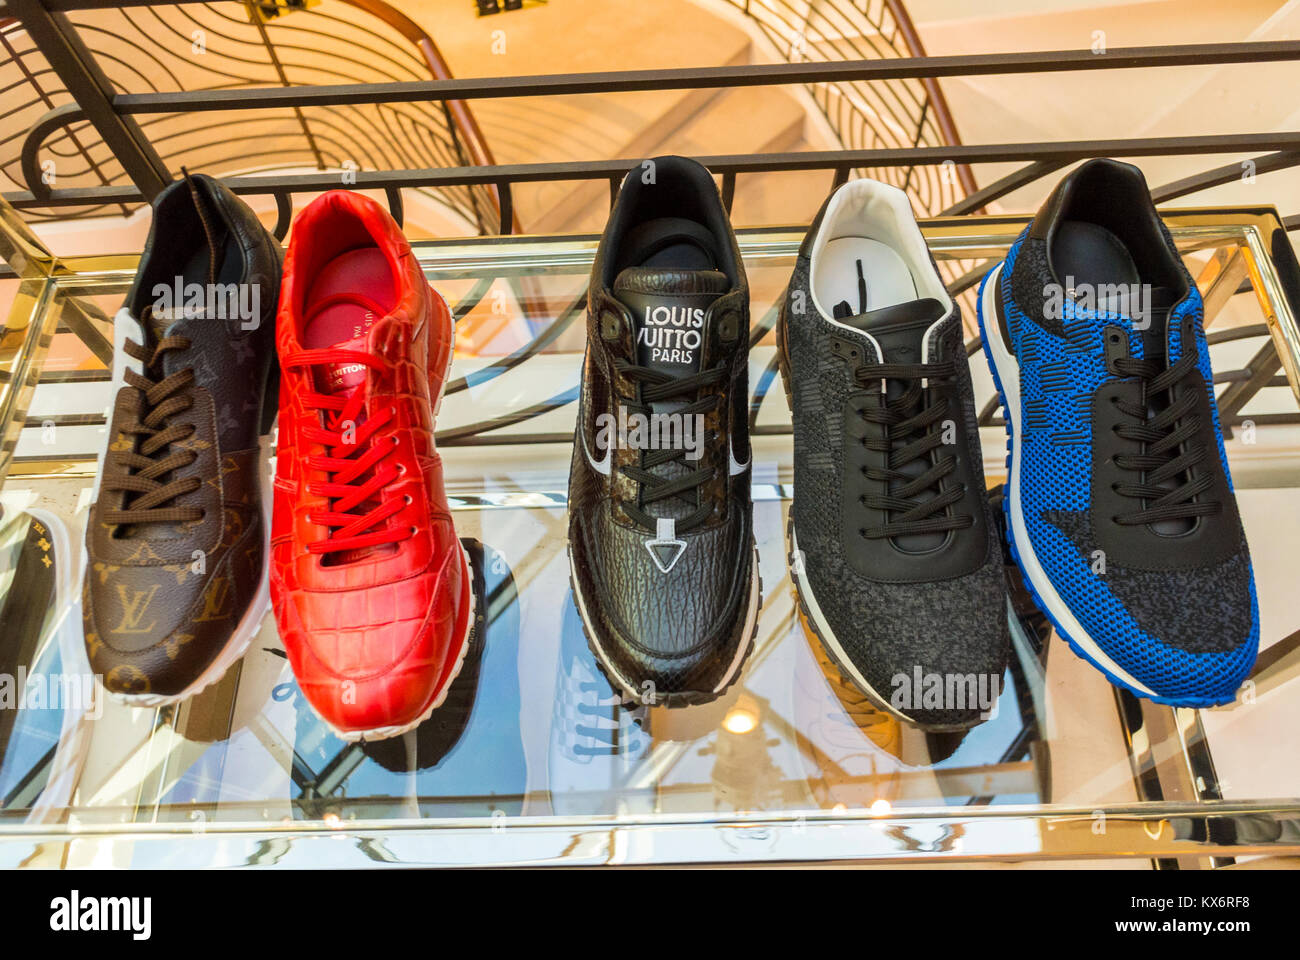 Monaco, Monte Carlo, Les Pavillions, Luxury Shops, Louis Vuitton, LVMH,  Detail, Luxury Sneakers, Shopping Shoes on Display Shopping Center,  Designer sneakers Stock Photo - Alamy